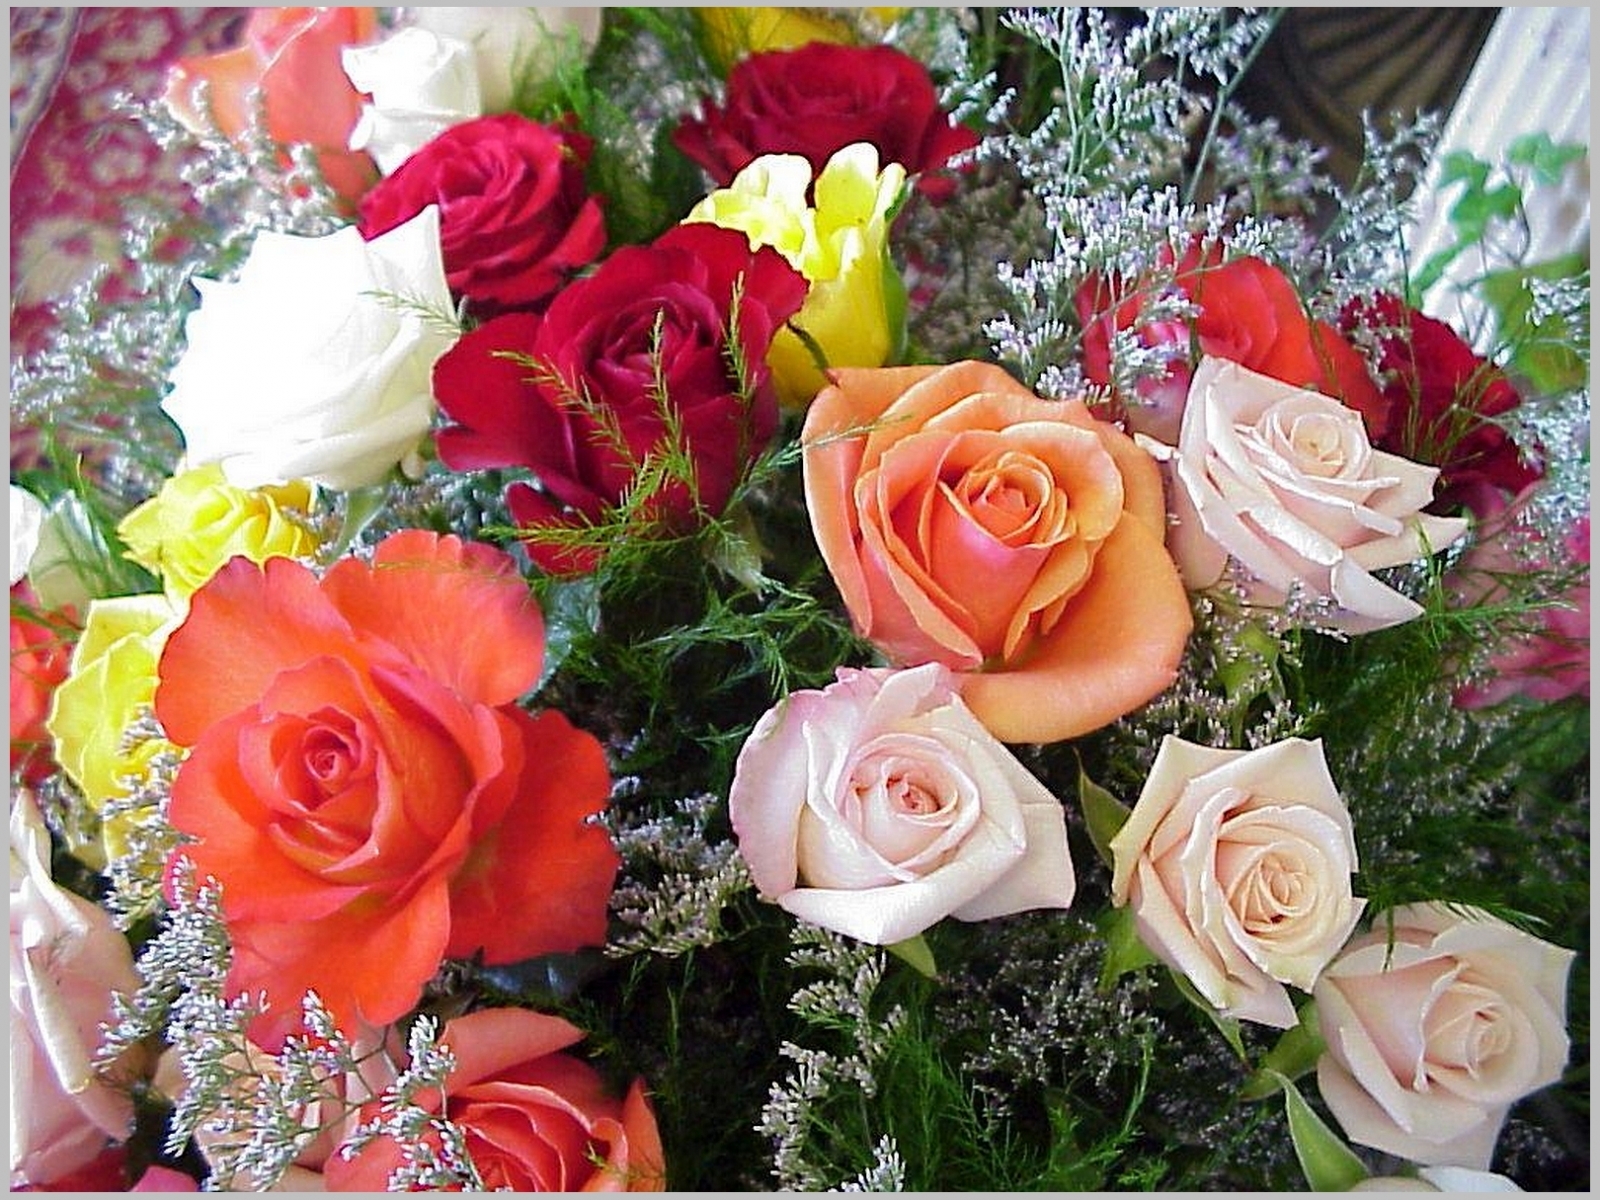 plants, holidays, flowers, roses, march 8 international women's day (iwd) HD for desktop 1080p